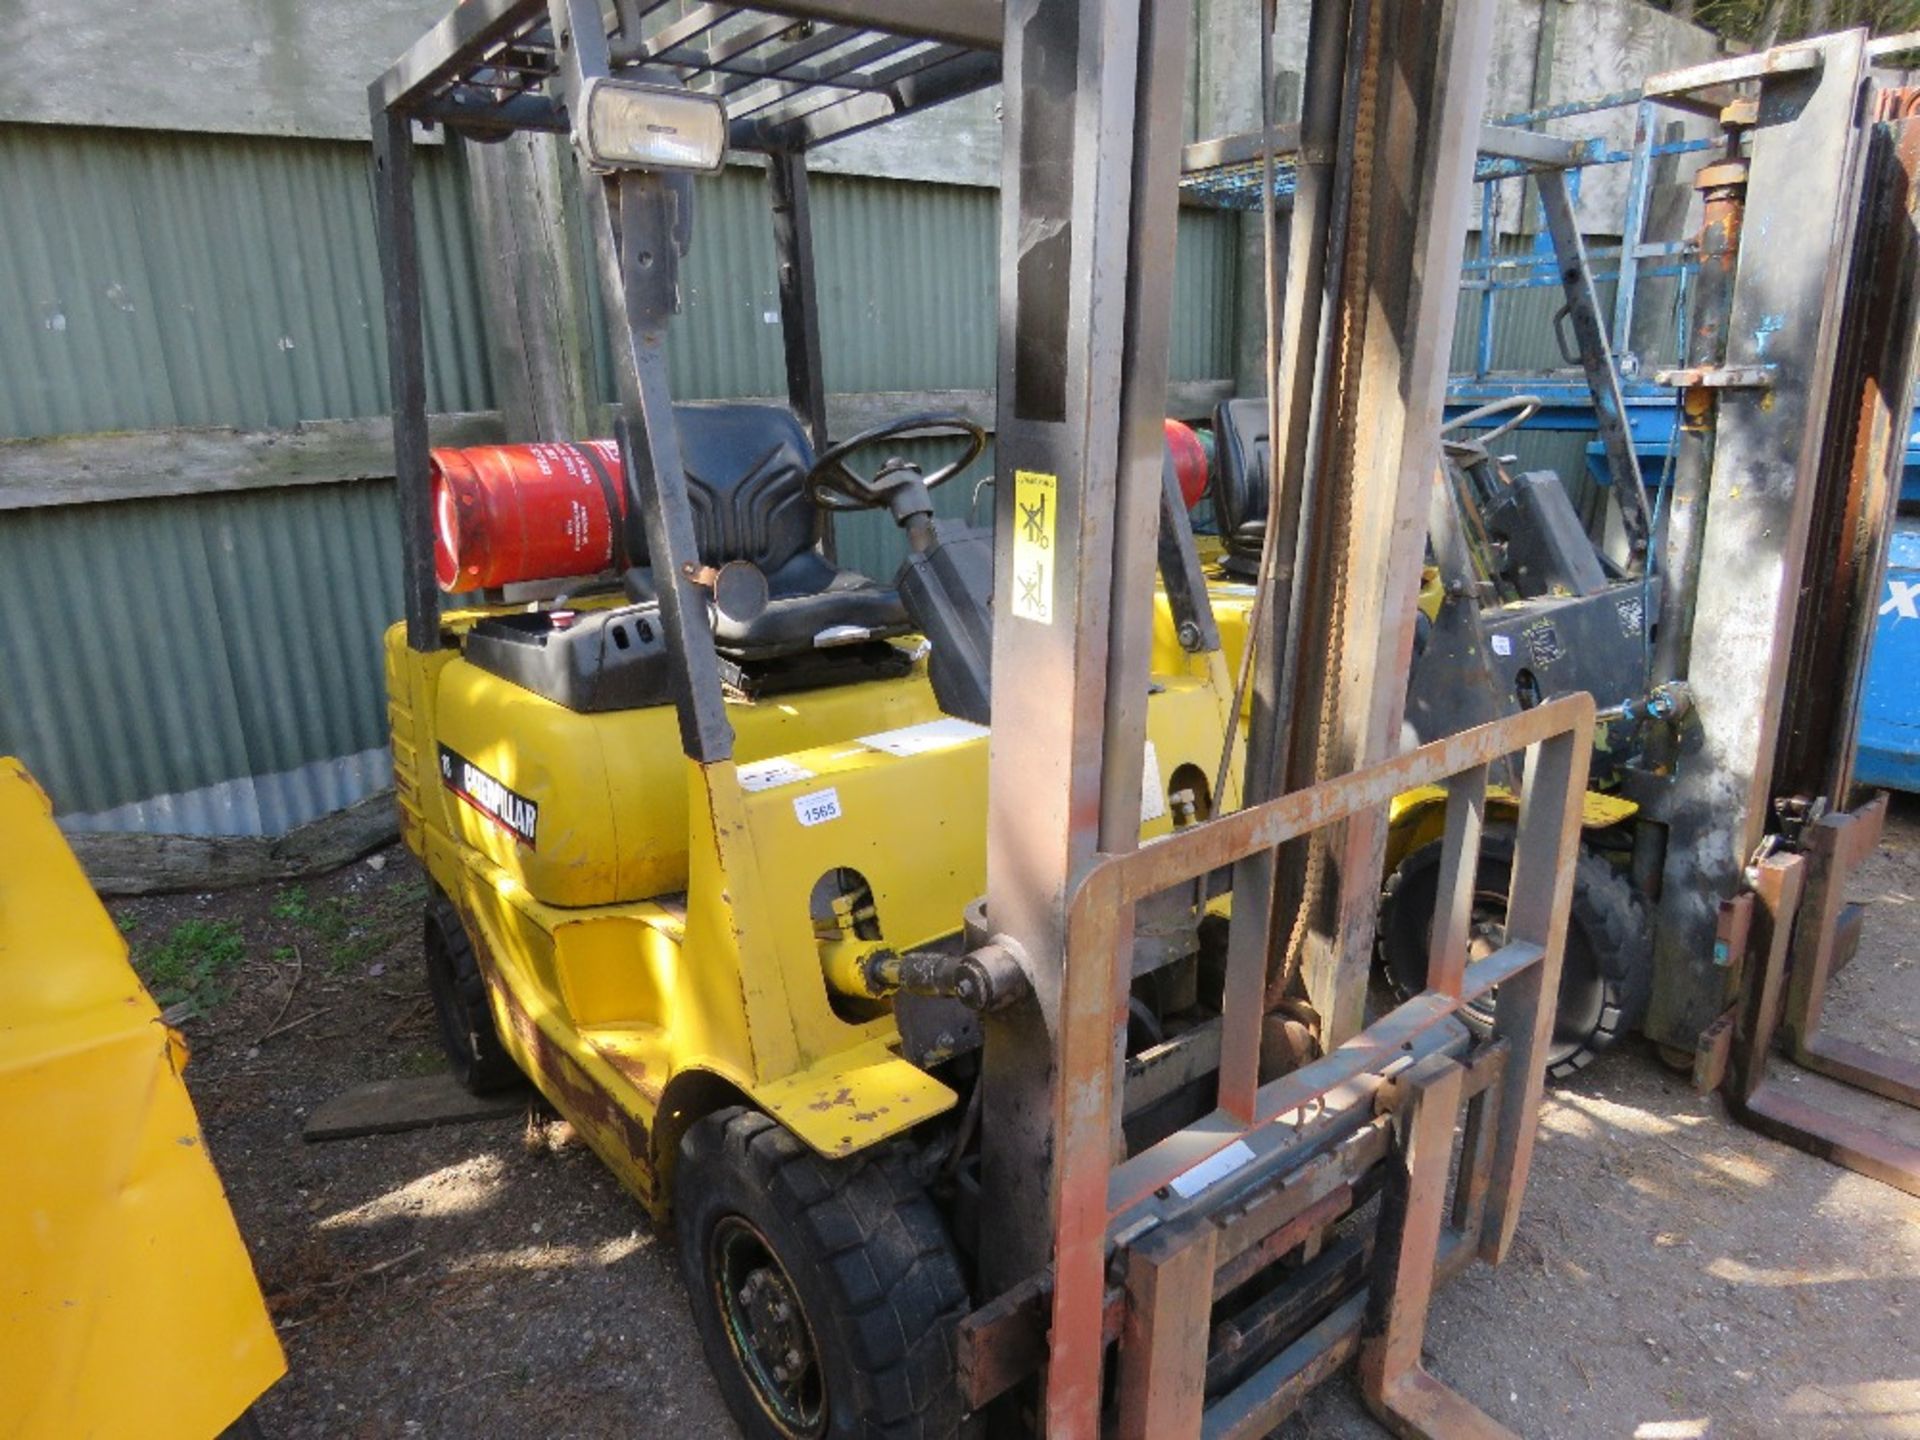 CATERPILLAR GP18 GAS POWERED FORKLIFT. WHEN TESTED WAS SEEN TO START AND RUN BRIEFLY BUT CUTTING OUT - Image 3 of 6